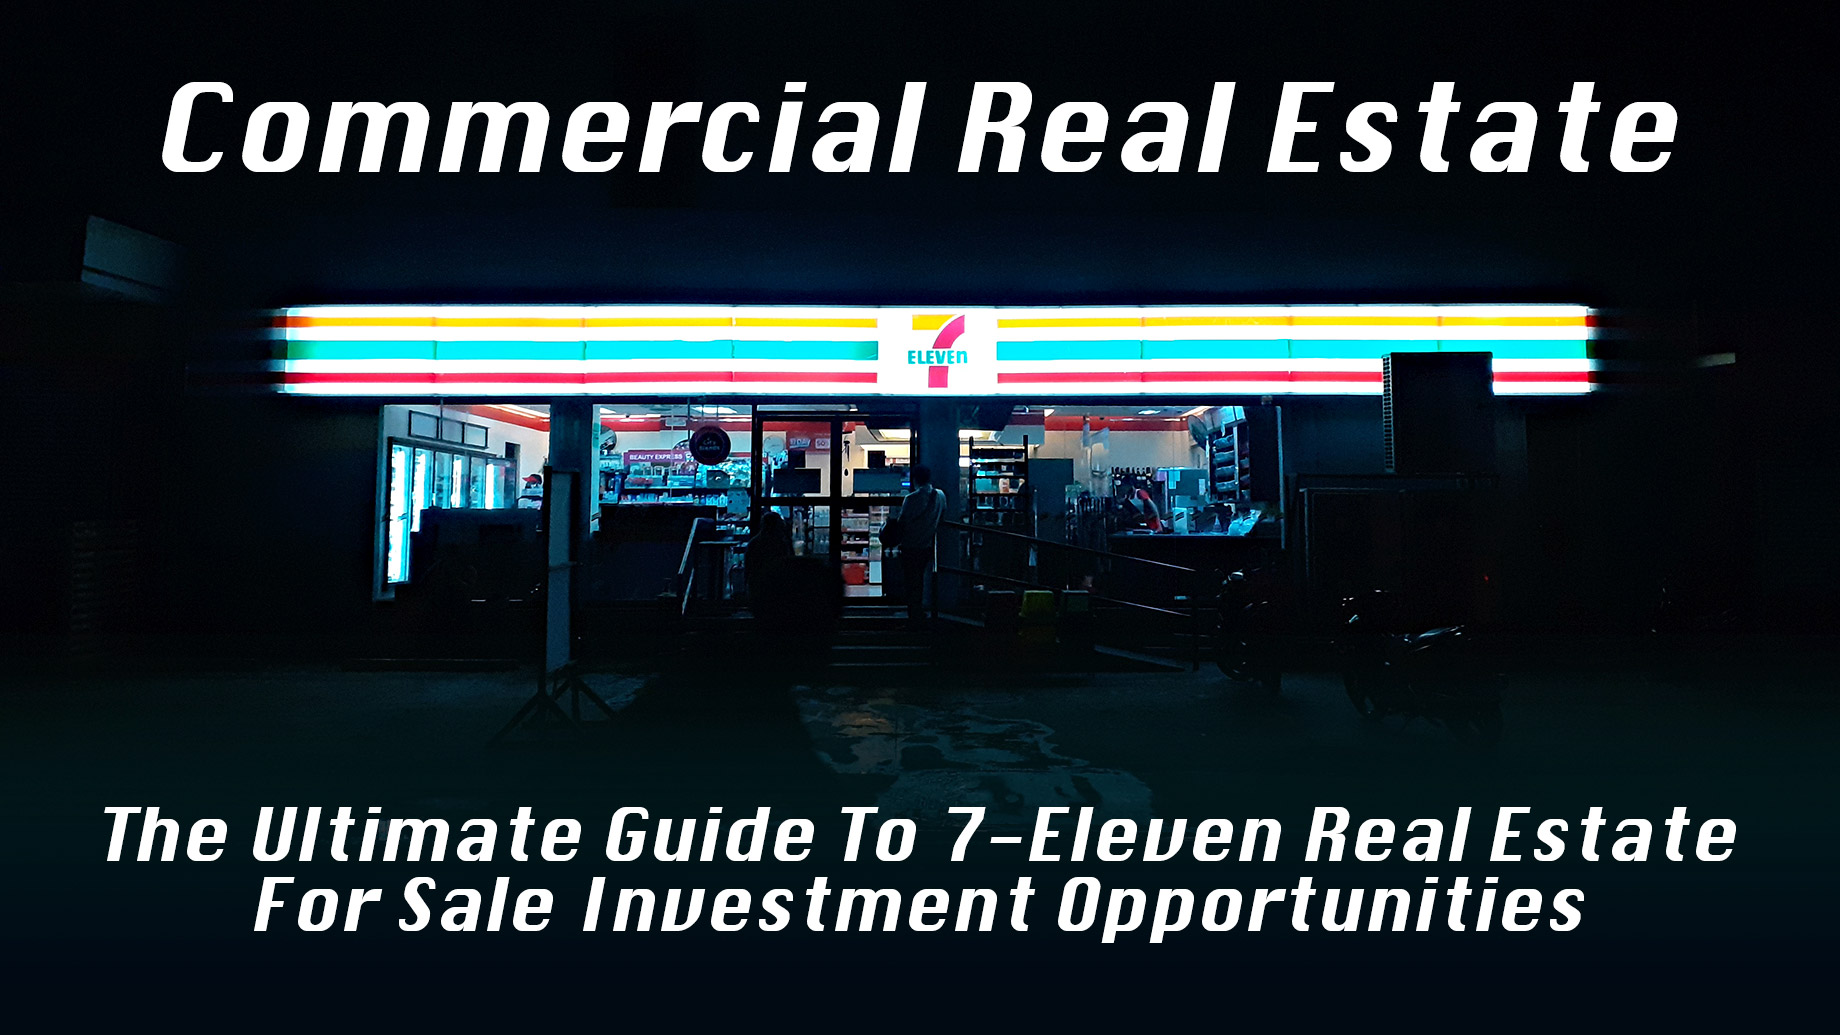 The Ultimate Guide To 7-Eleven Real Estate For Sale Investment Opportunities